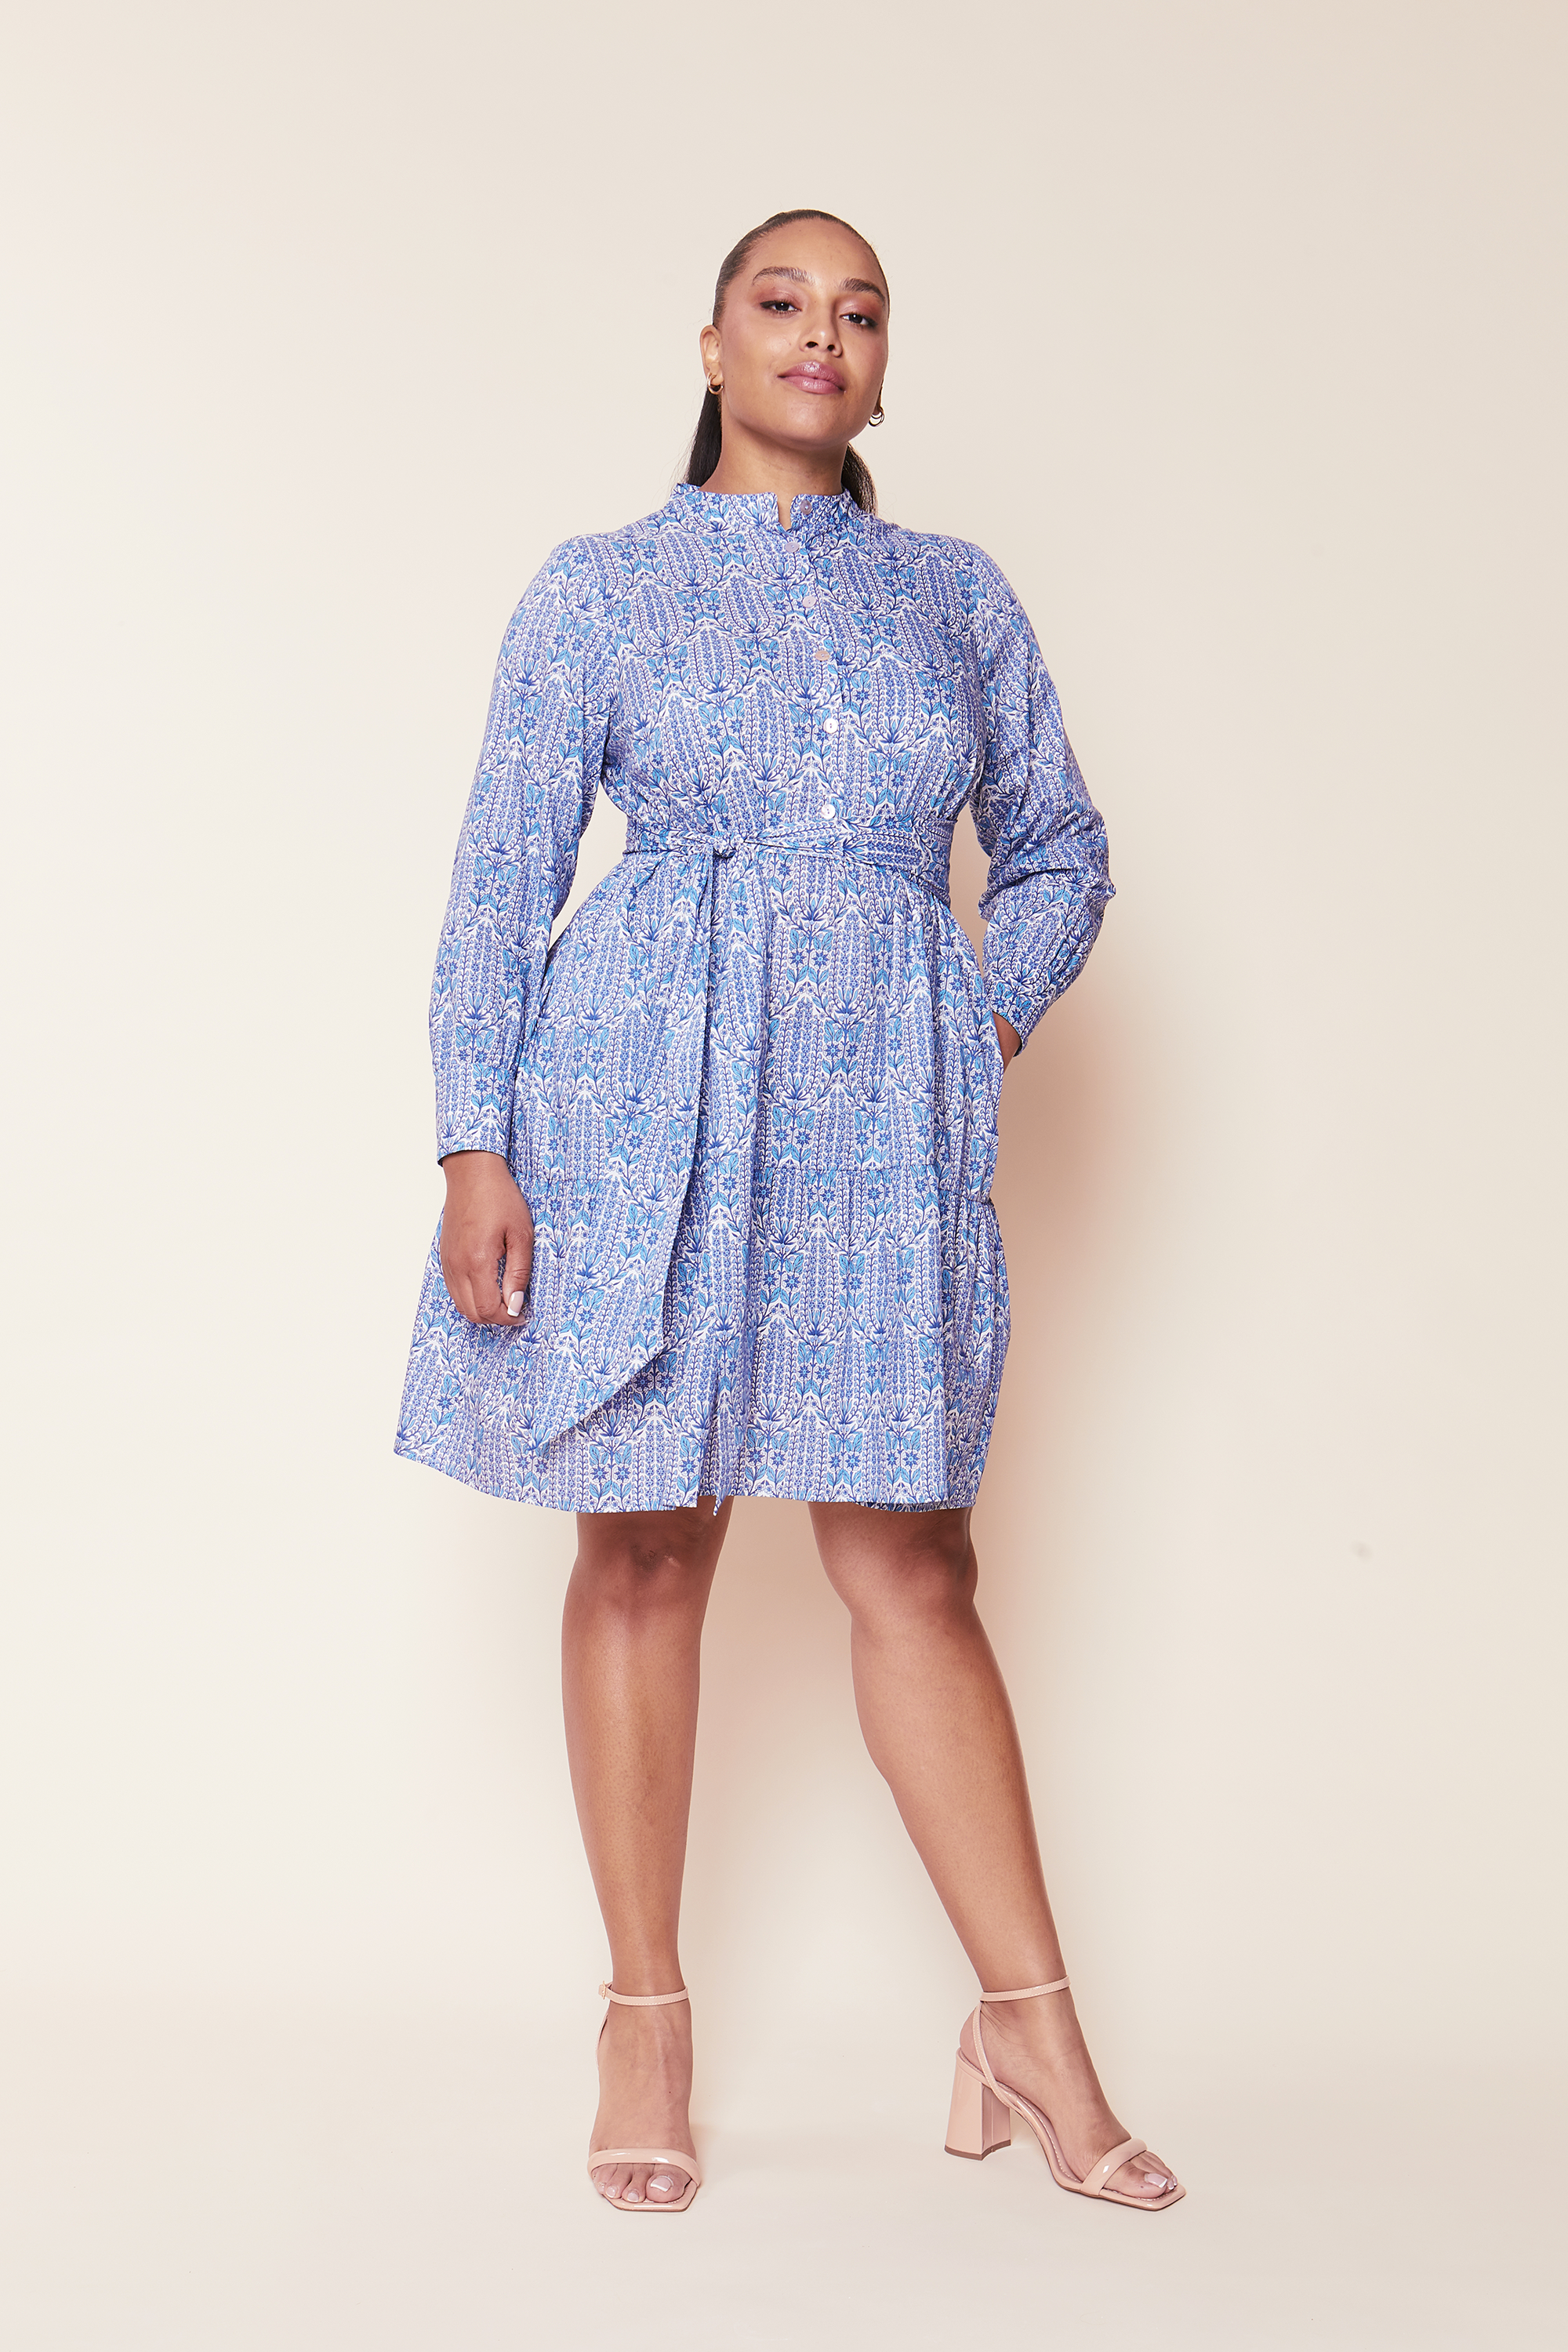 Blue Print Cotton Tiered Midi Dress Plus-size by THE HOUR made with Liberty Fabric details